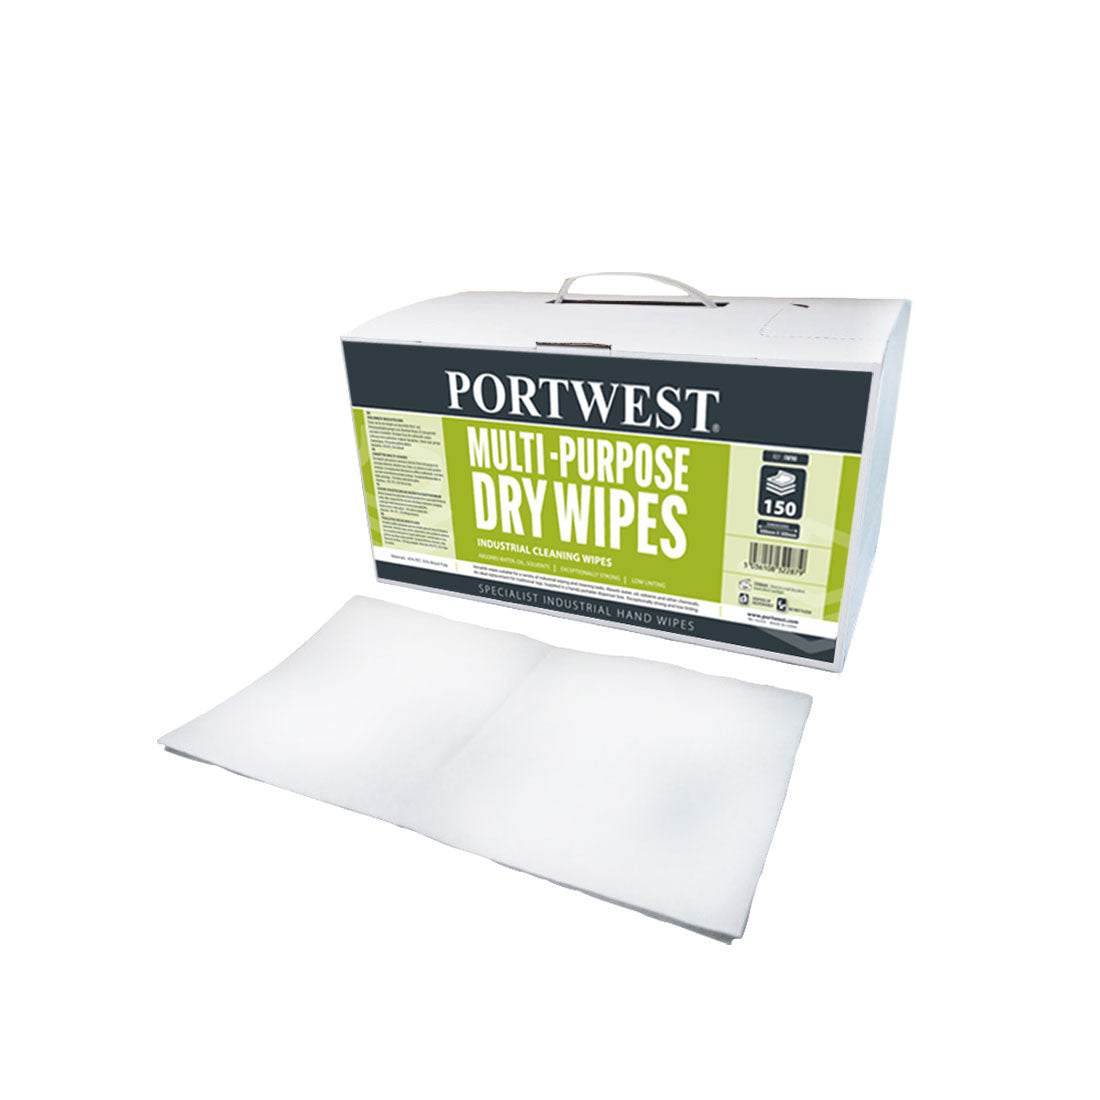 Portwest Multi-Purpose Dry Wipes (Pack of 150)